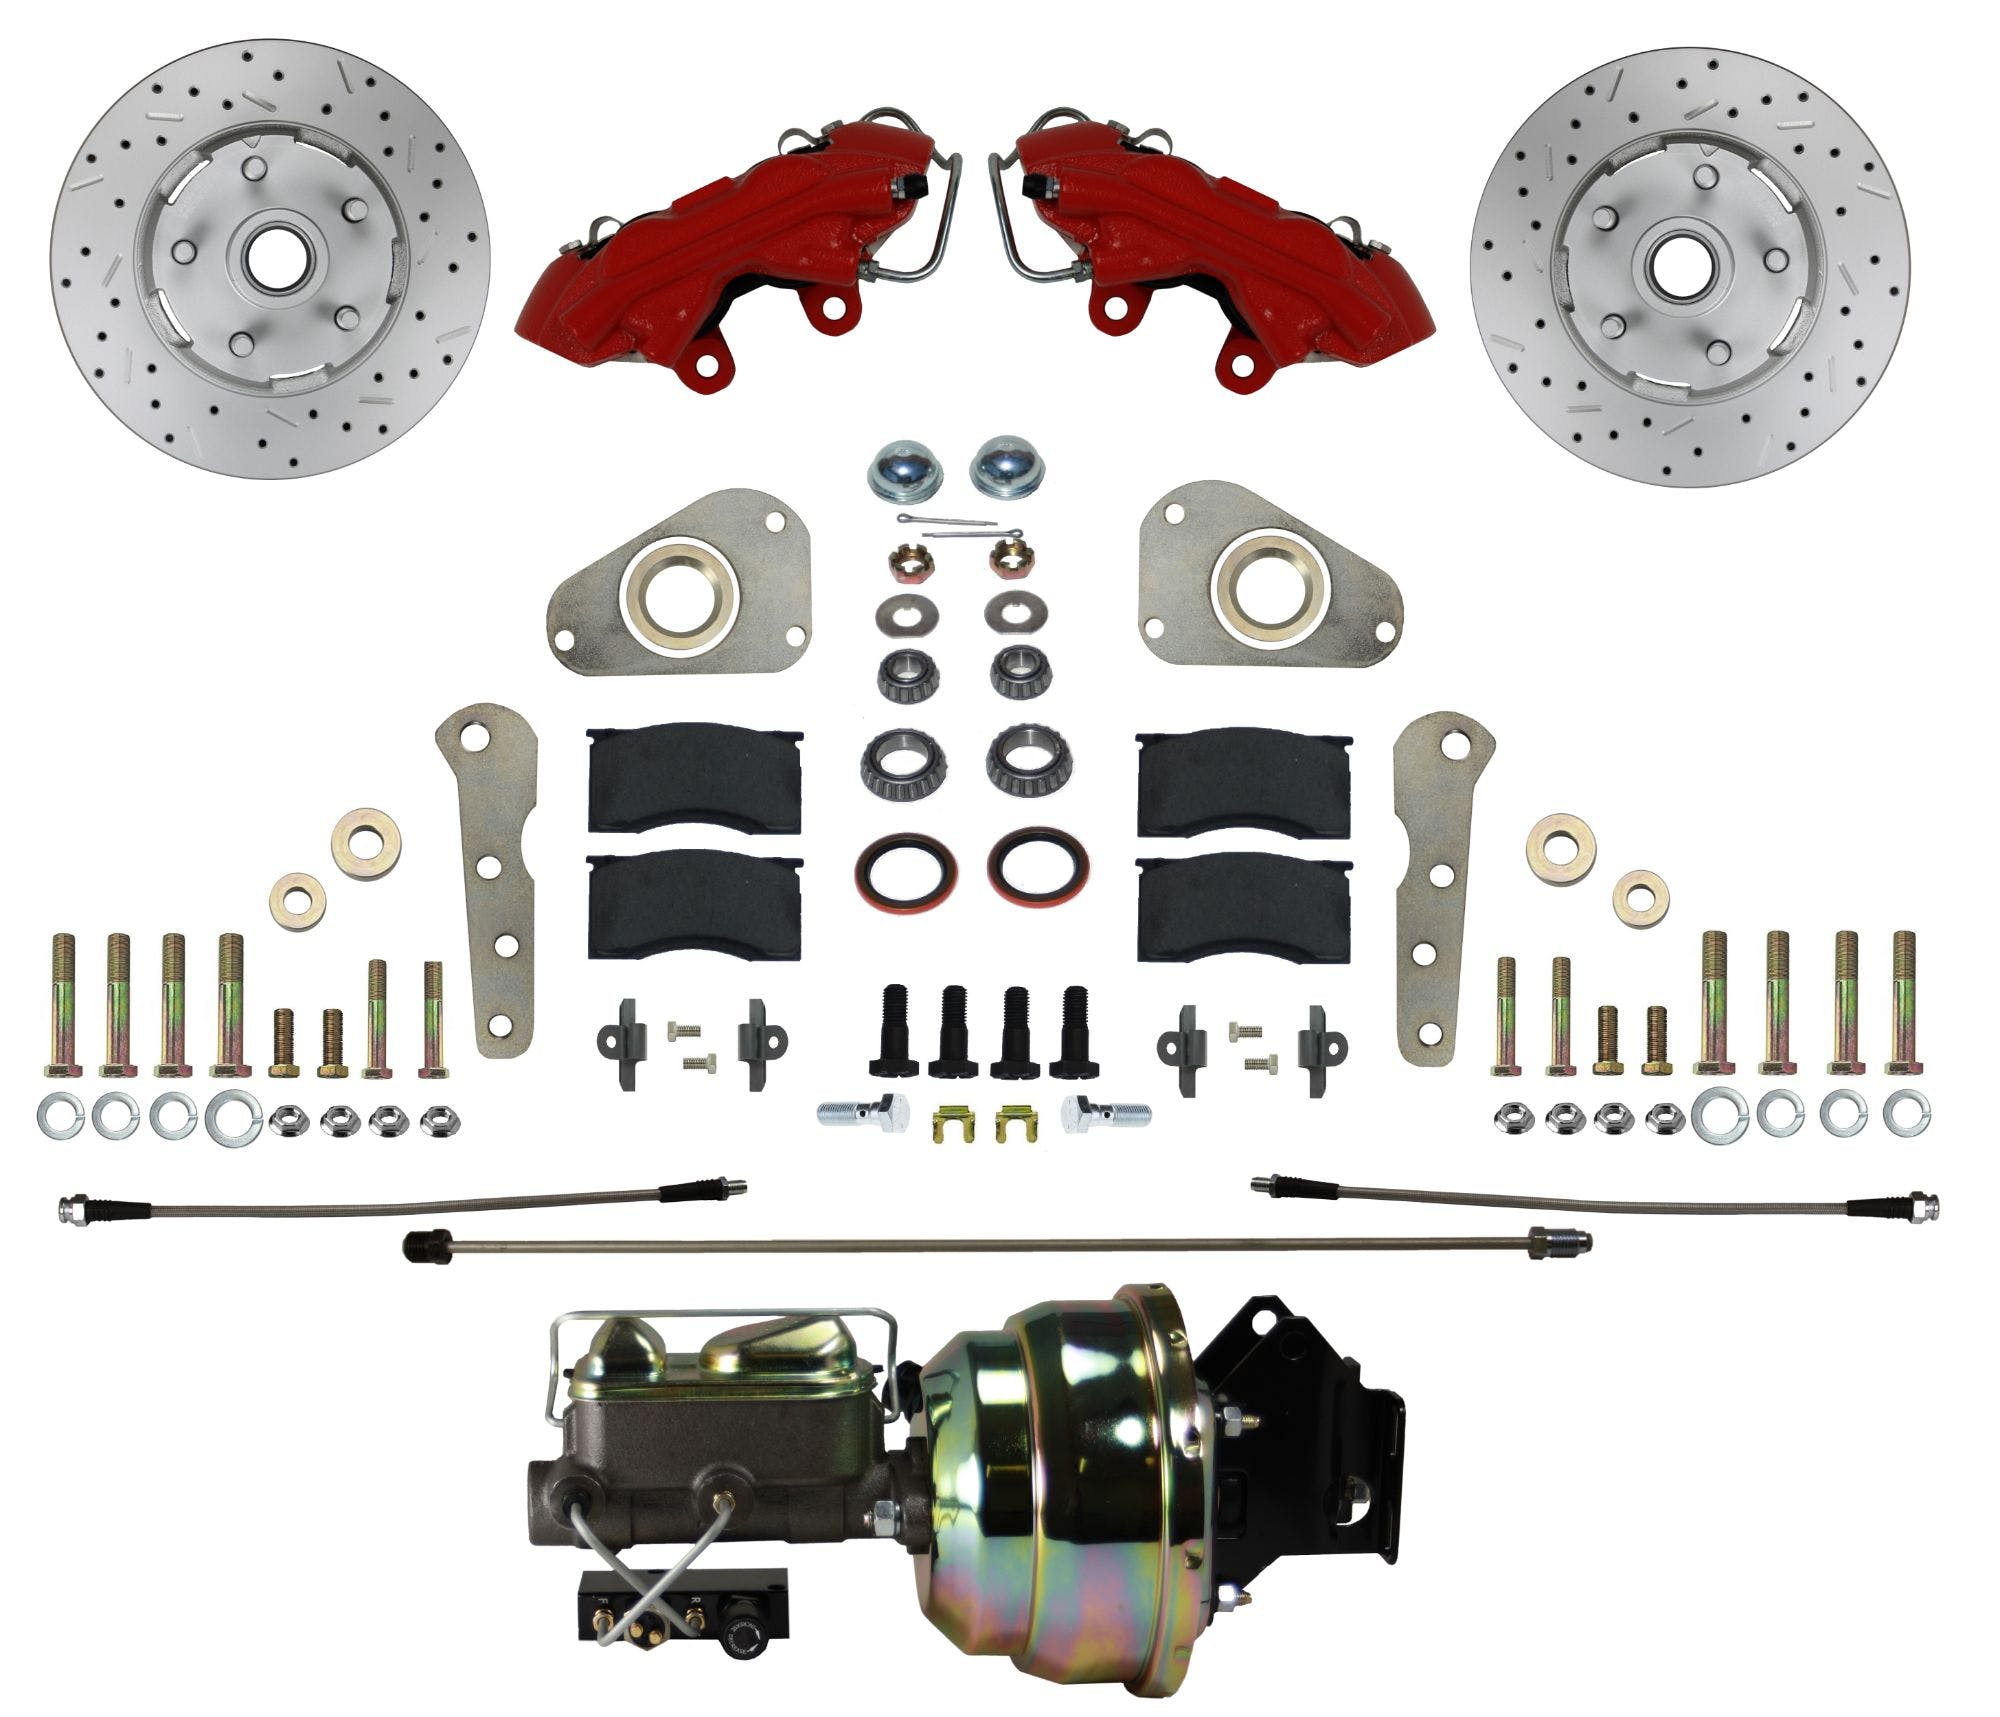 LEED Brakes RFC0025-Y307X Ford Full Size Y Block Power Disc Conversion Kit with MaxGrip XDS, Red Powder